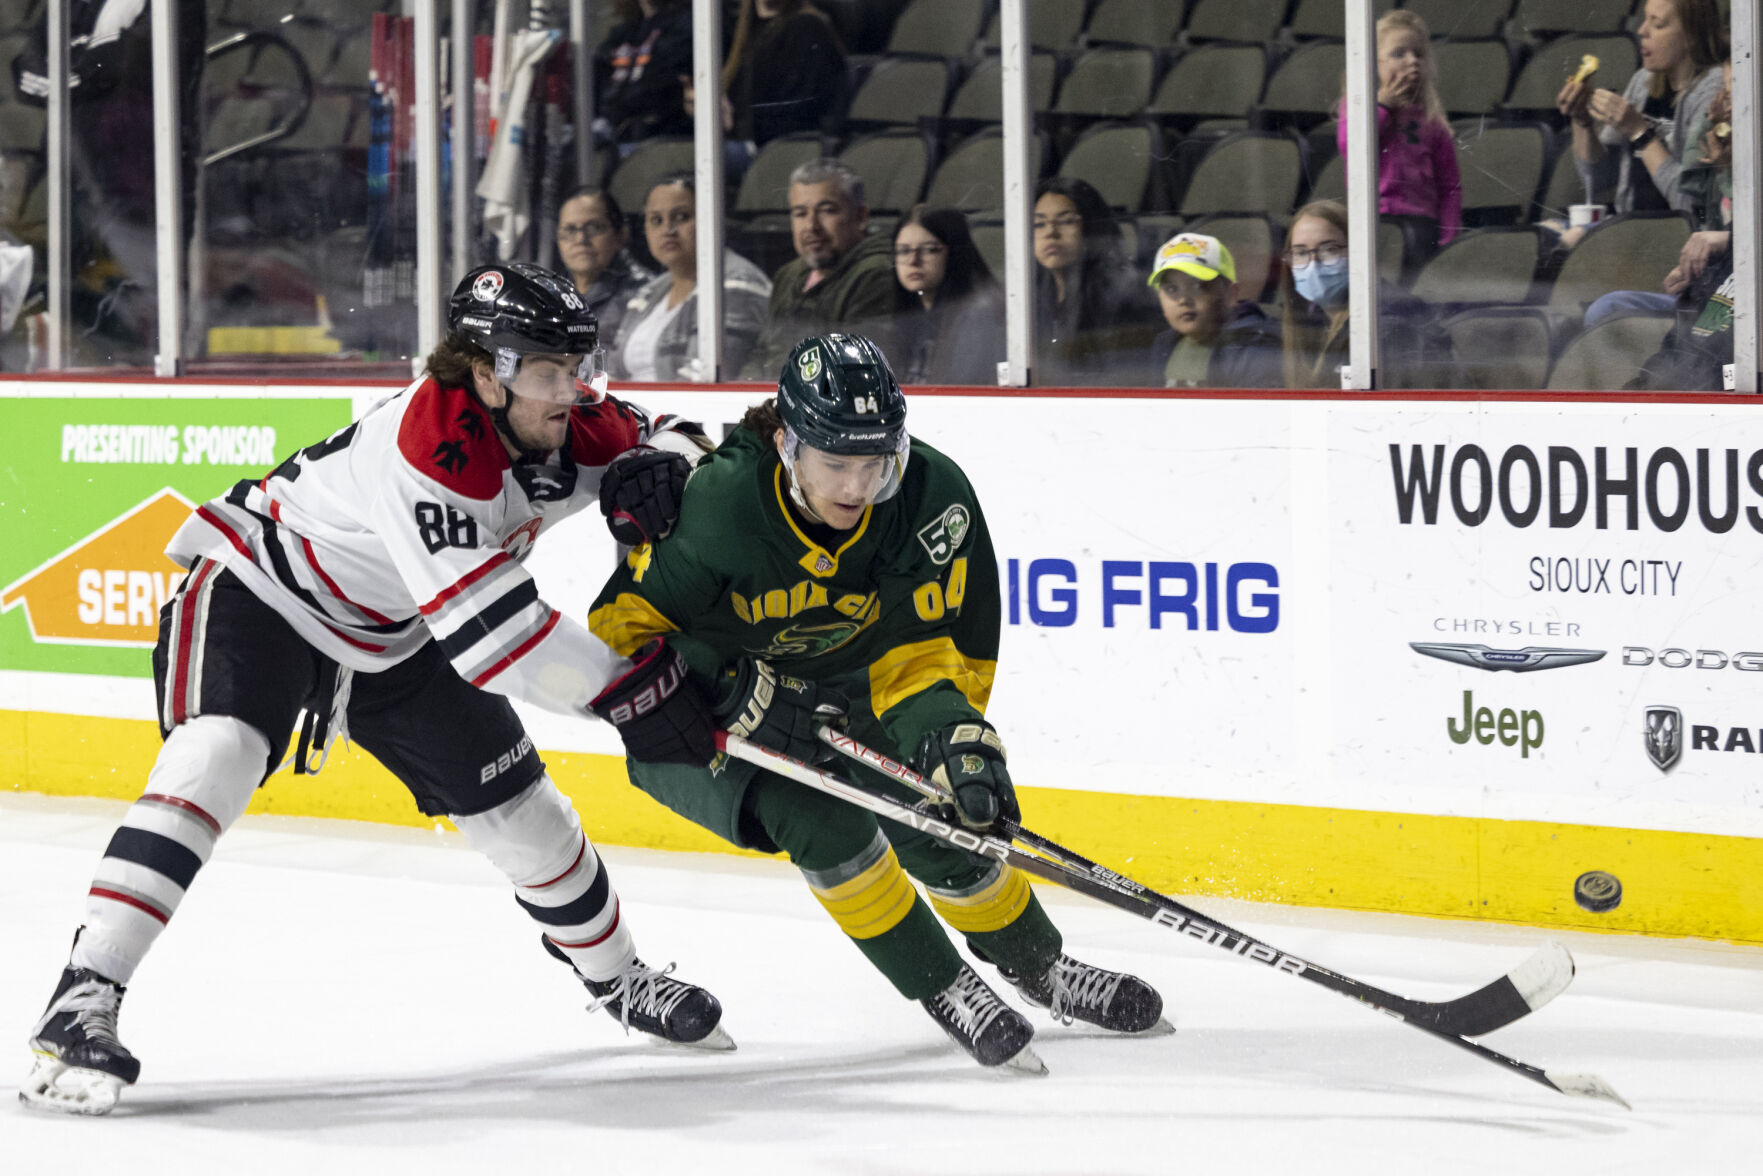 Dylan James scores four goals in career night for Sioux City Musketeers